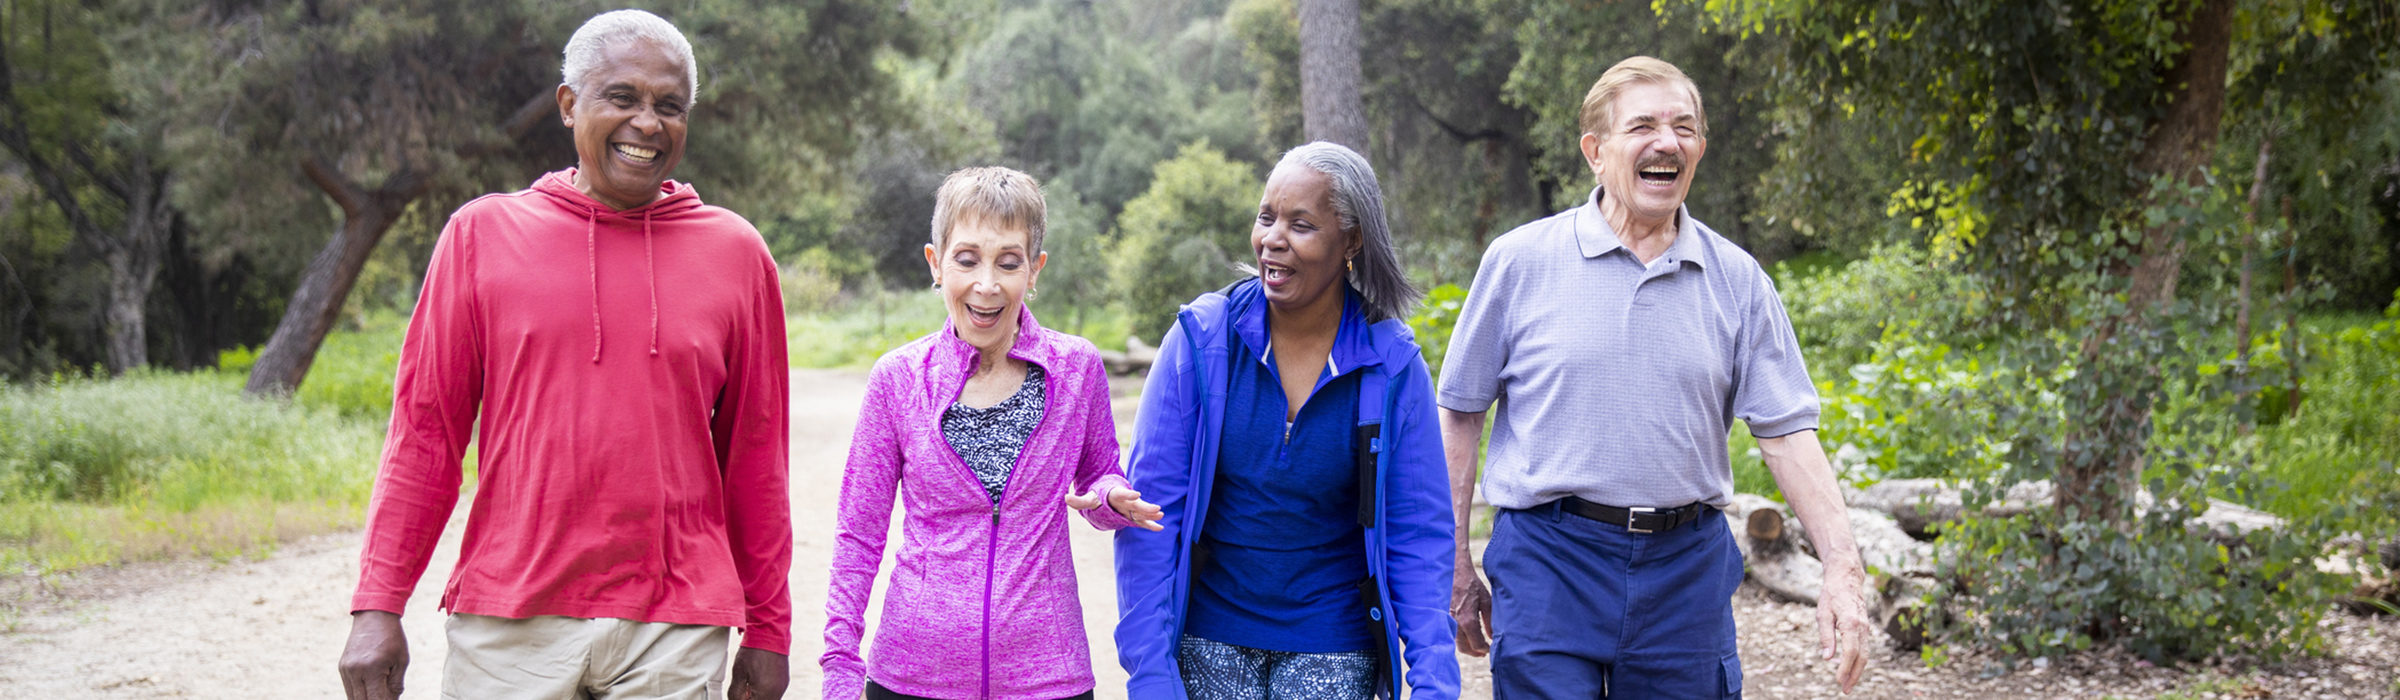 Four older adults walking outdoors